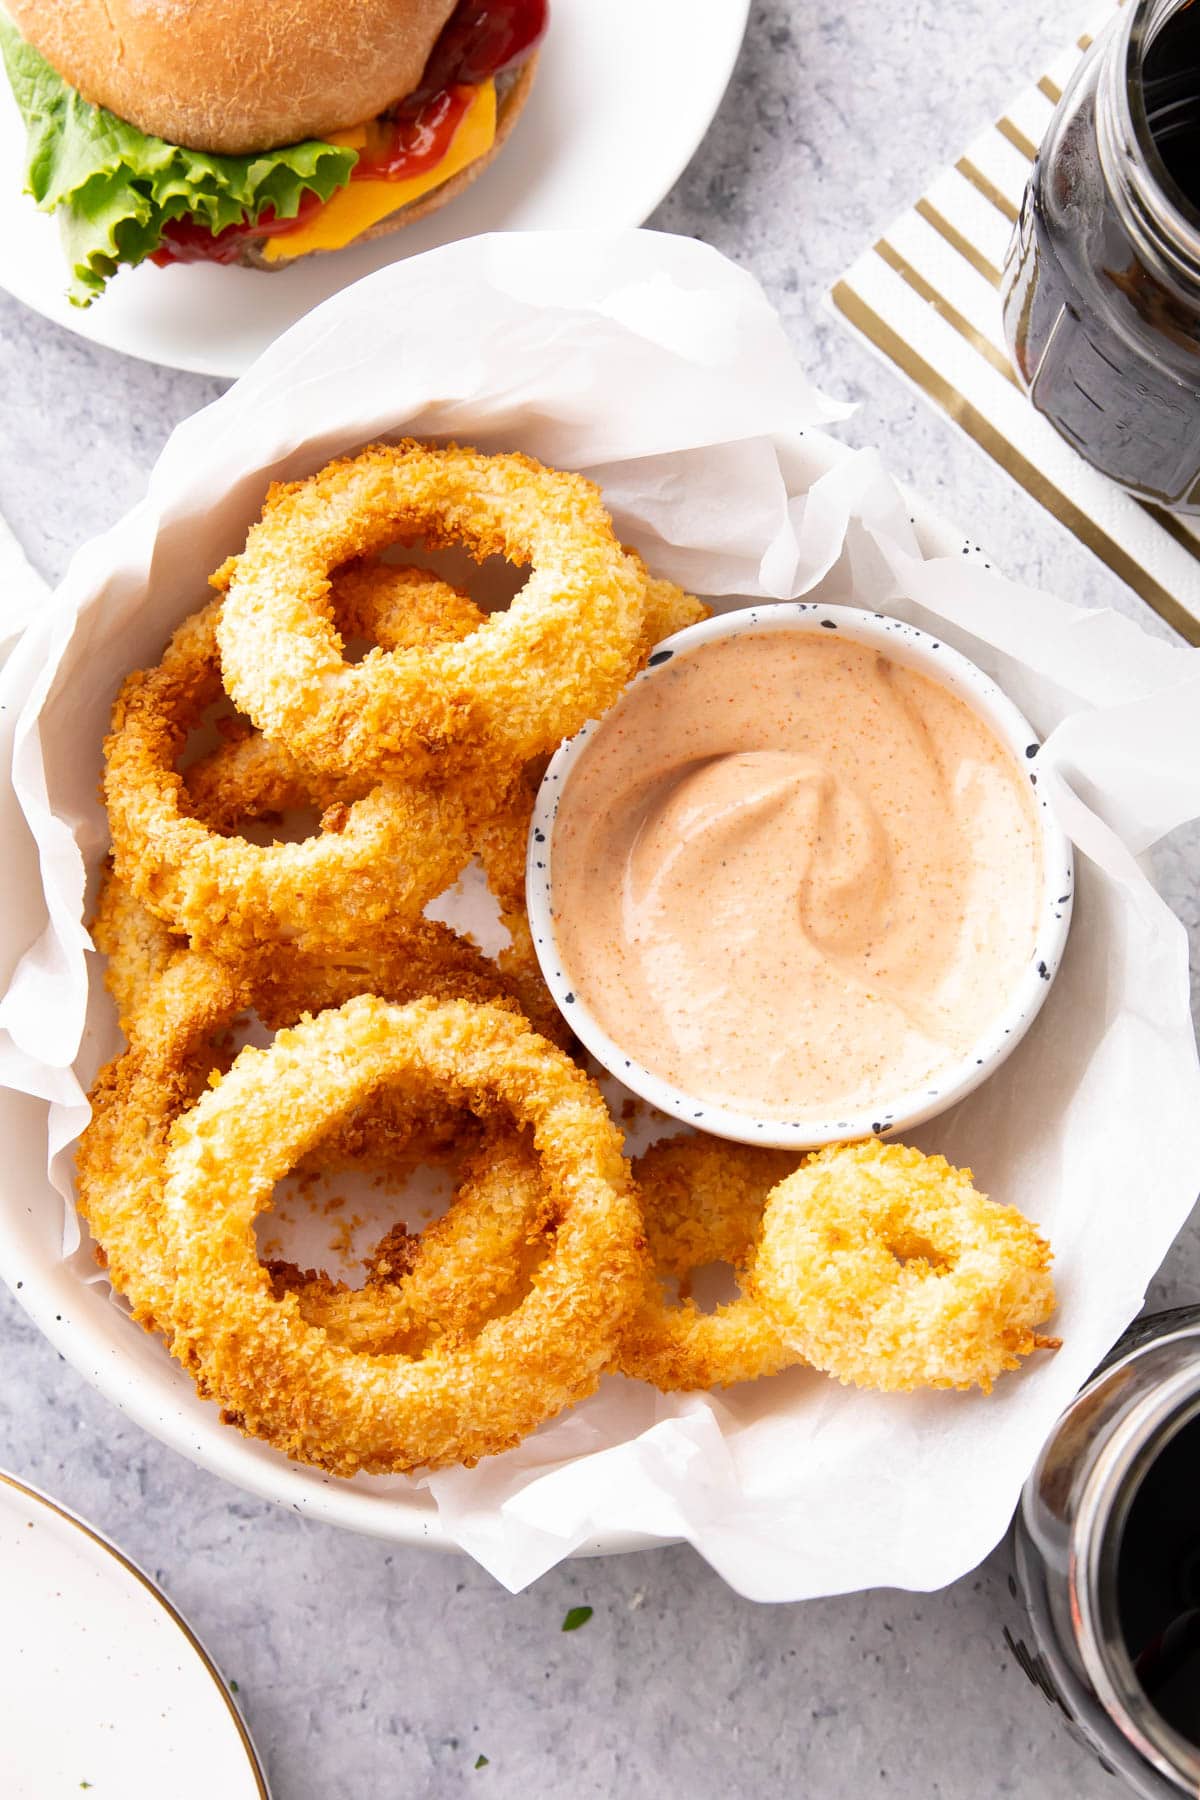 Onion ring sauce made with mayonnaise, ketchup, paprika, Cajun seasoning and more is thick and creamy in a bowl served with homemade onion rings